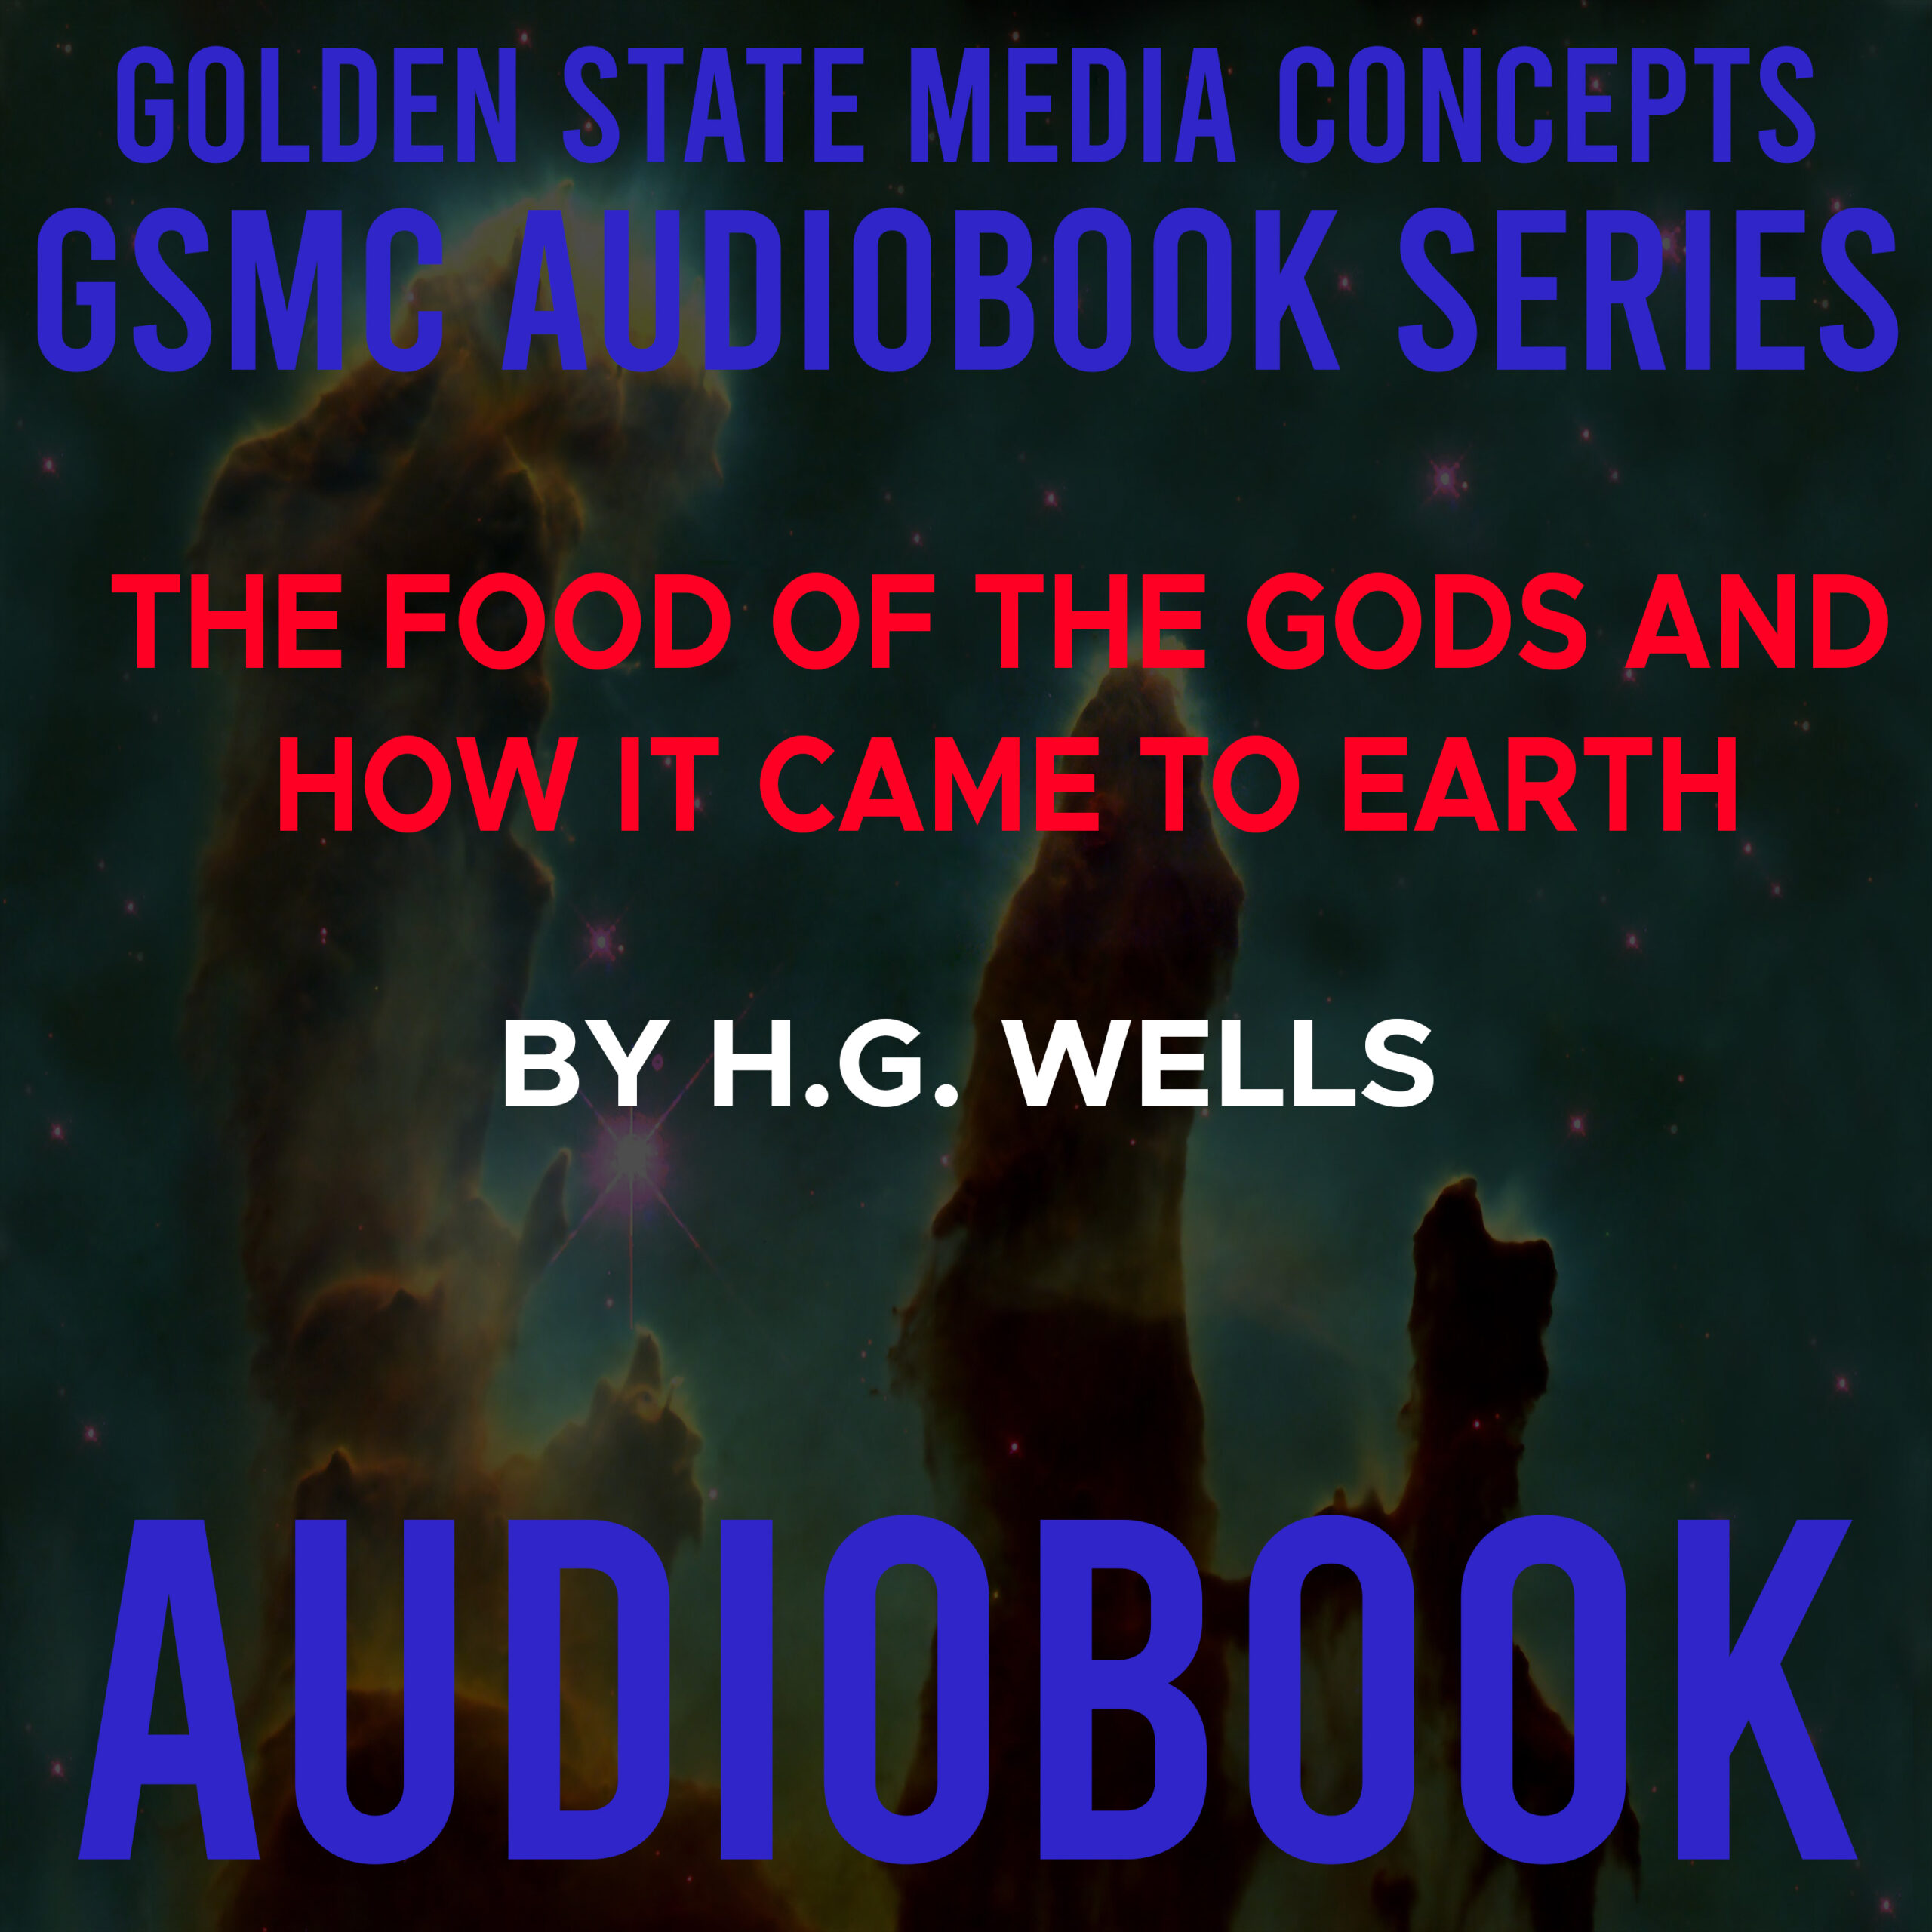 GSMC Audiobook Series: The Food of the Gods and How it Came to Earth